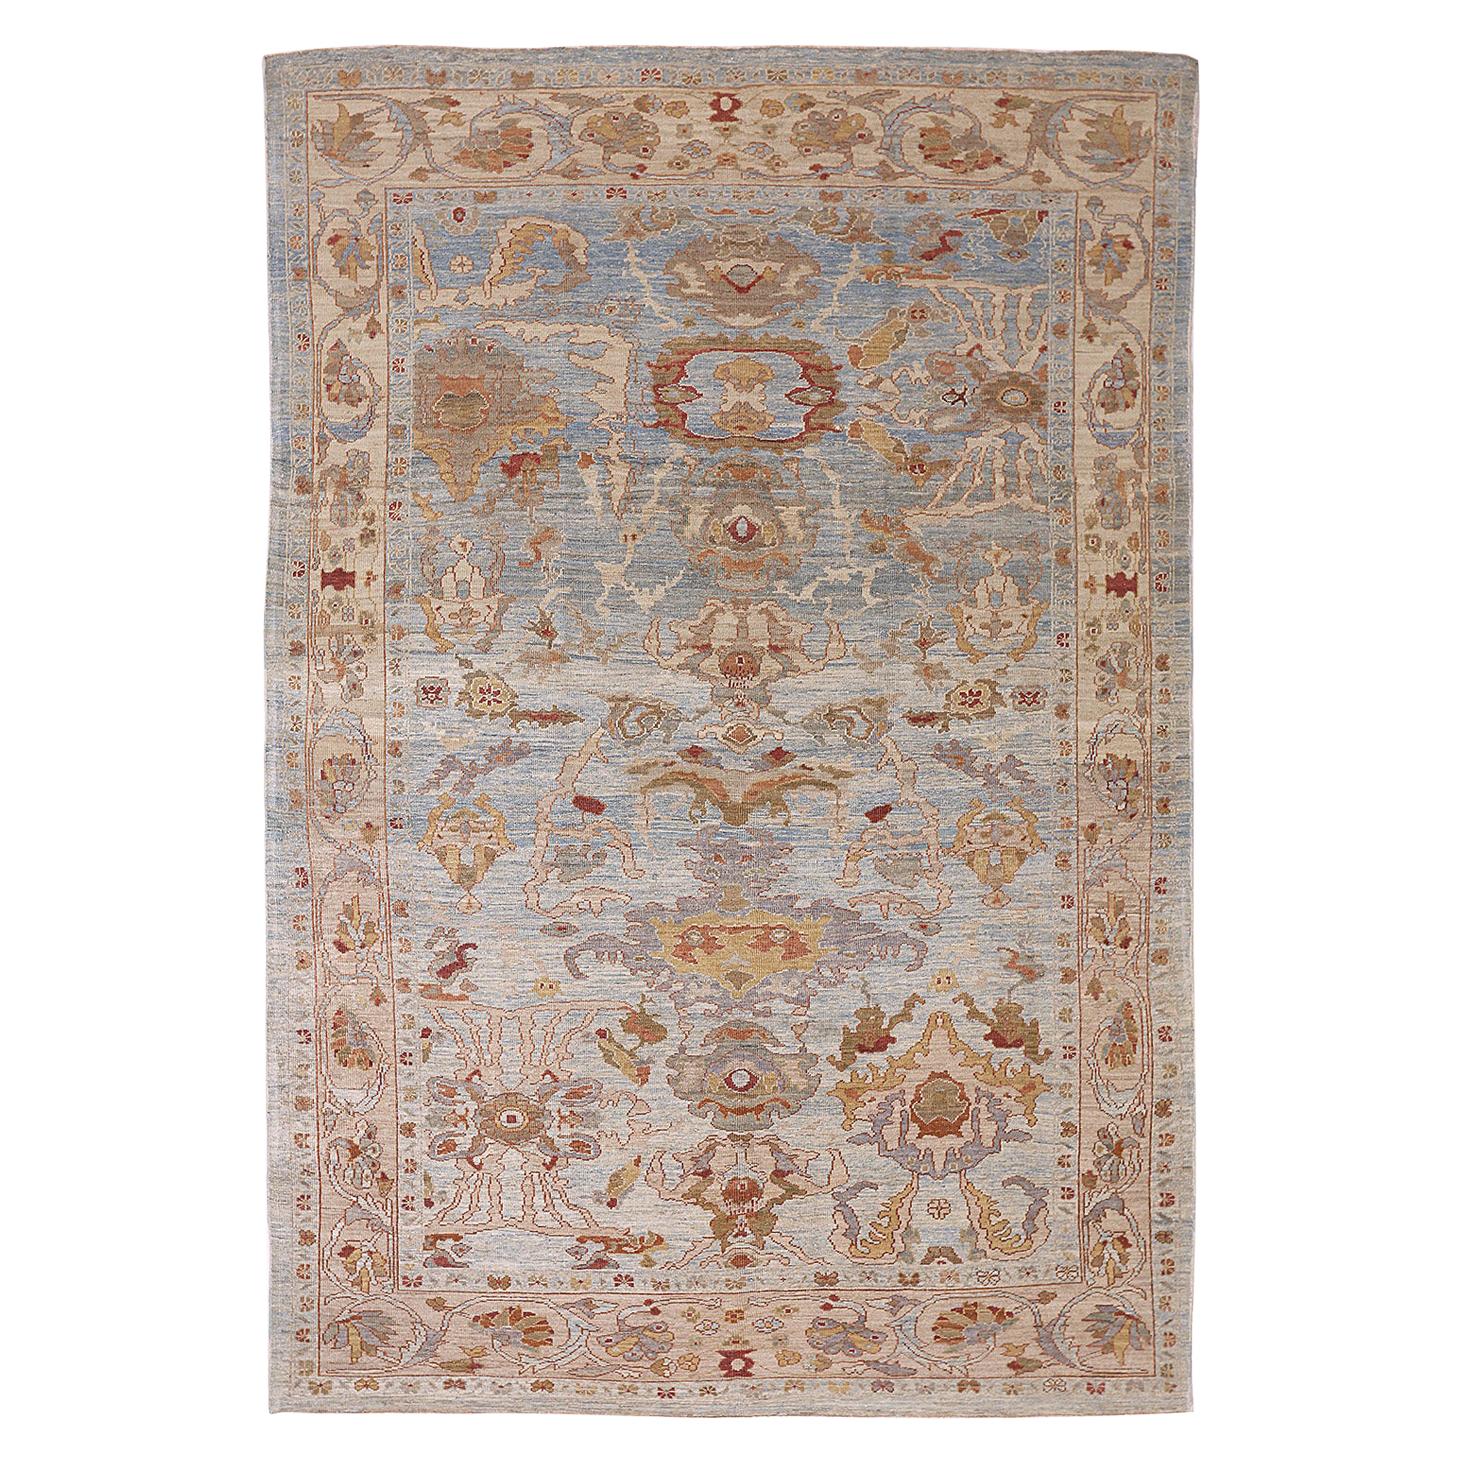 New Turkish Oushak Rug with Brown and Beige Botanical Patterns